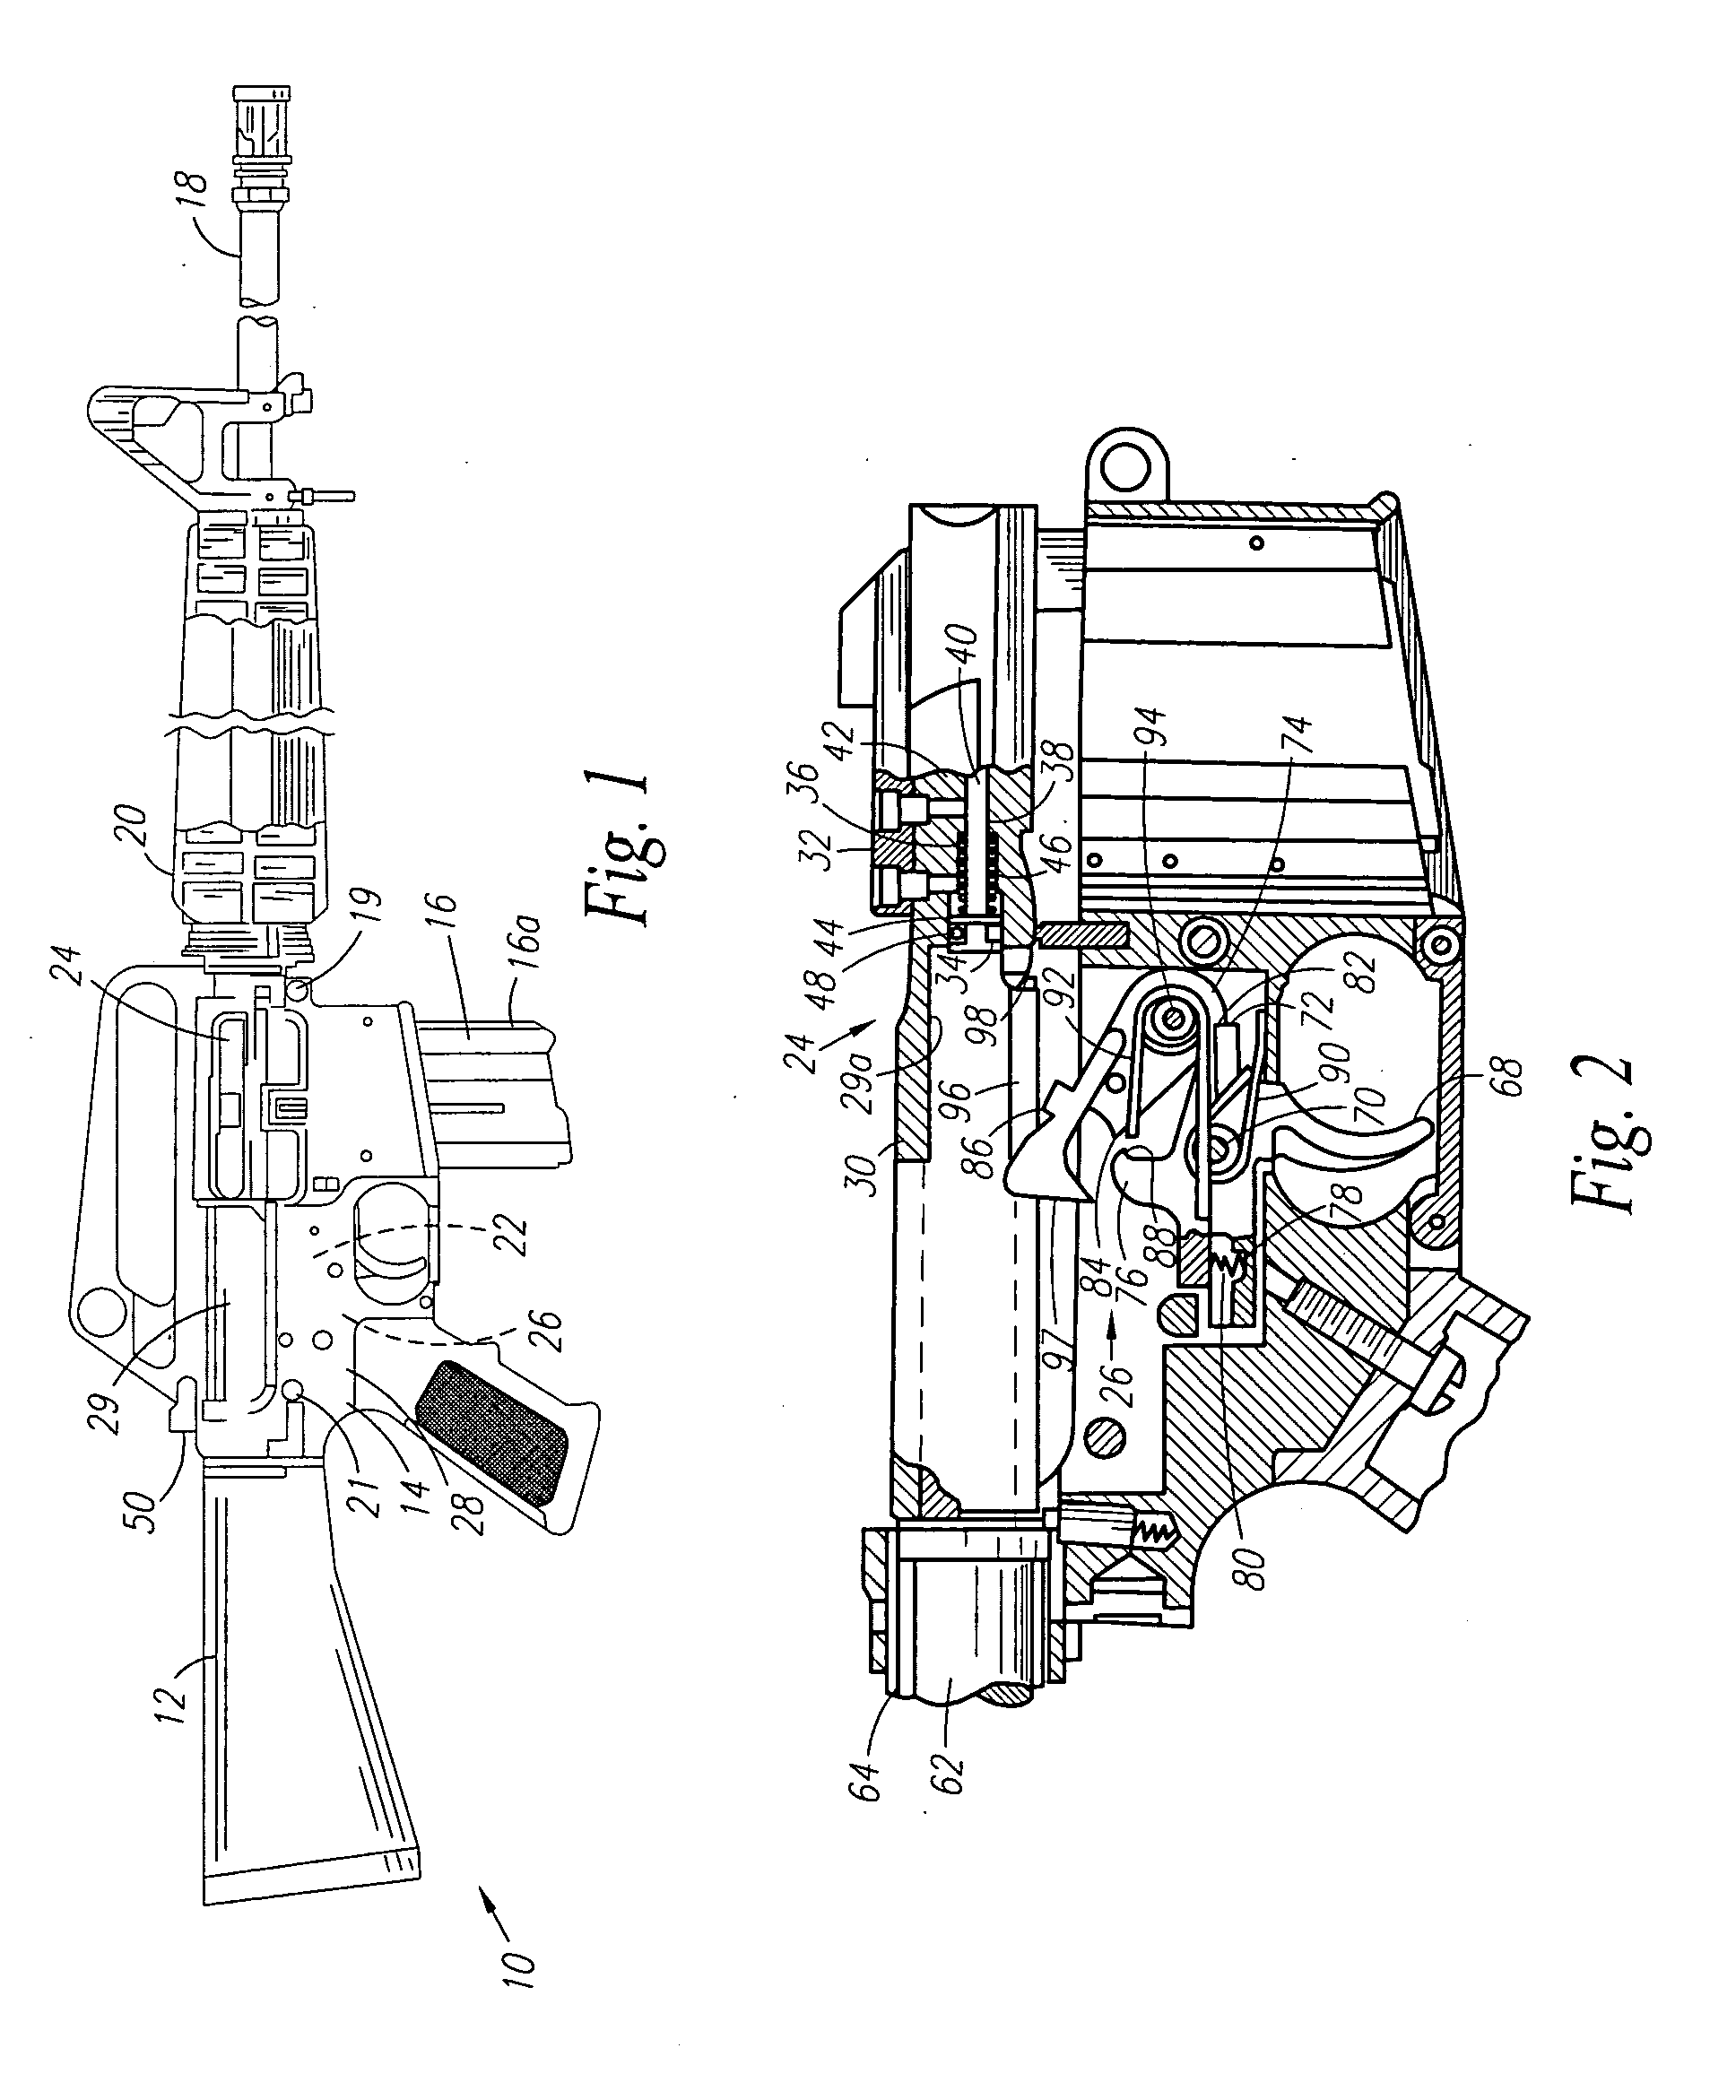 Device And Method For Converting And Preventing Conversion Of A Semi-Automatic Firearm To An Automatic Firearm